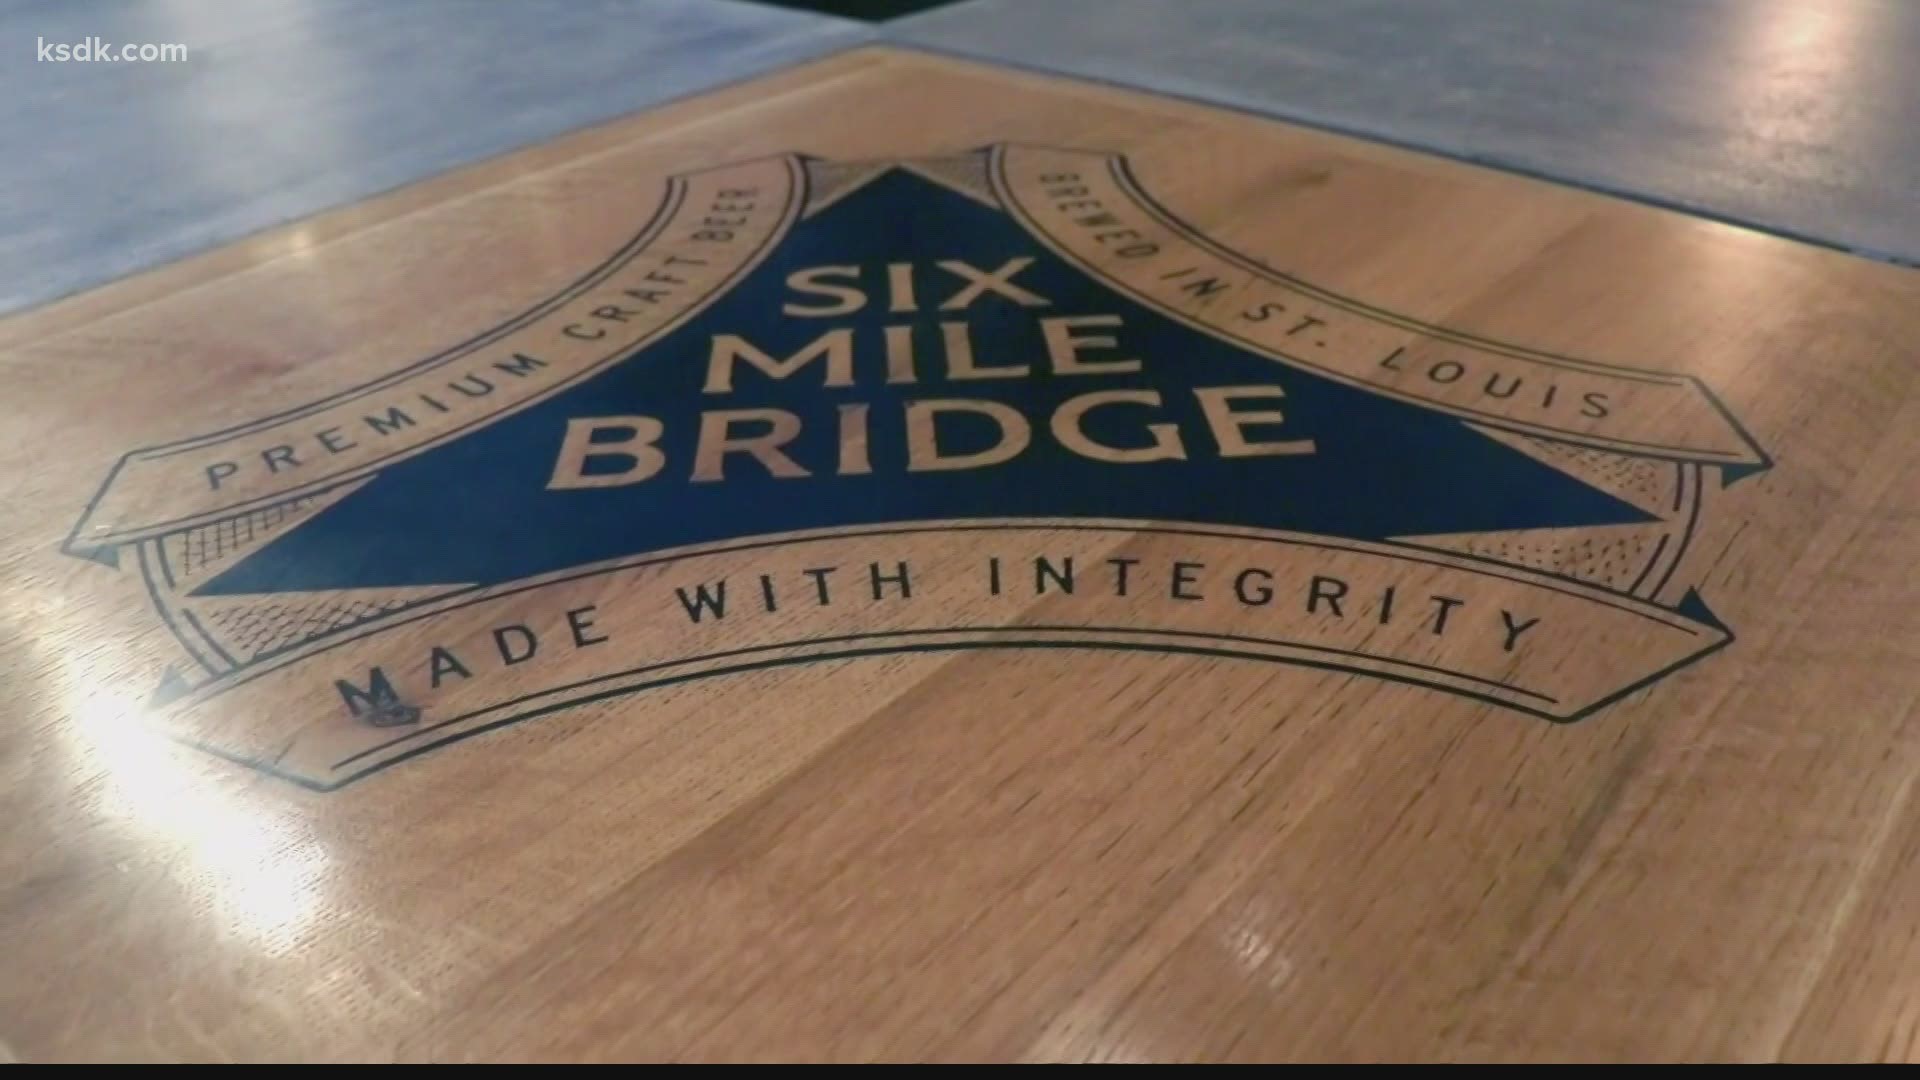 Six Mile Bridge Brewery has grown a lot since it started in 2015.